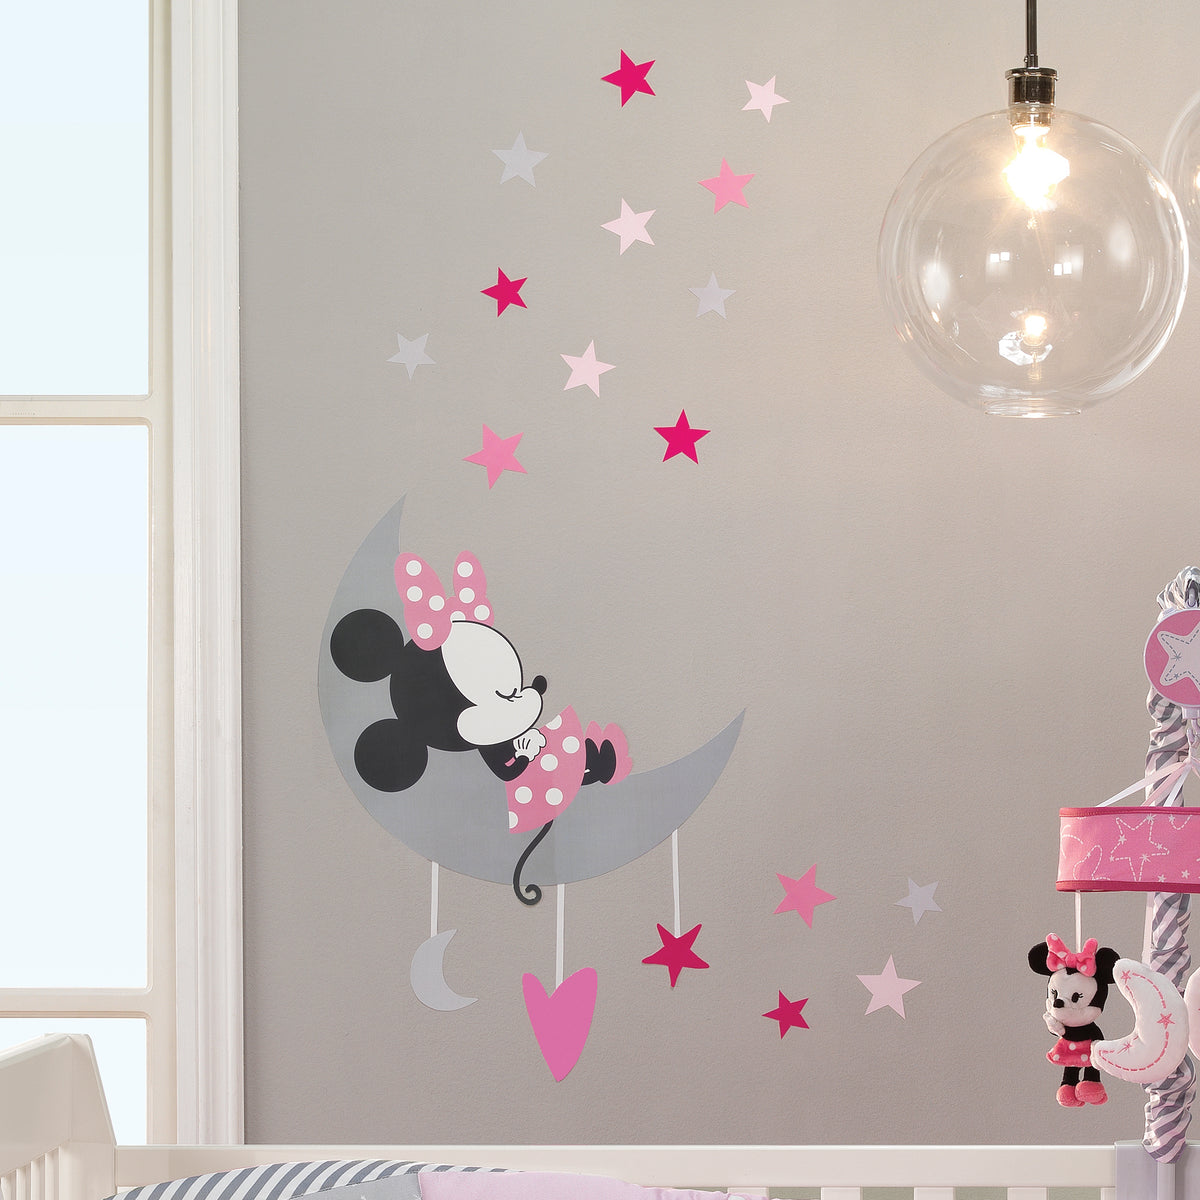 Silver Multi Star Wall Decals